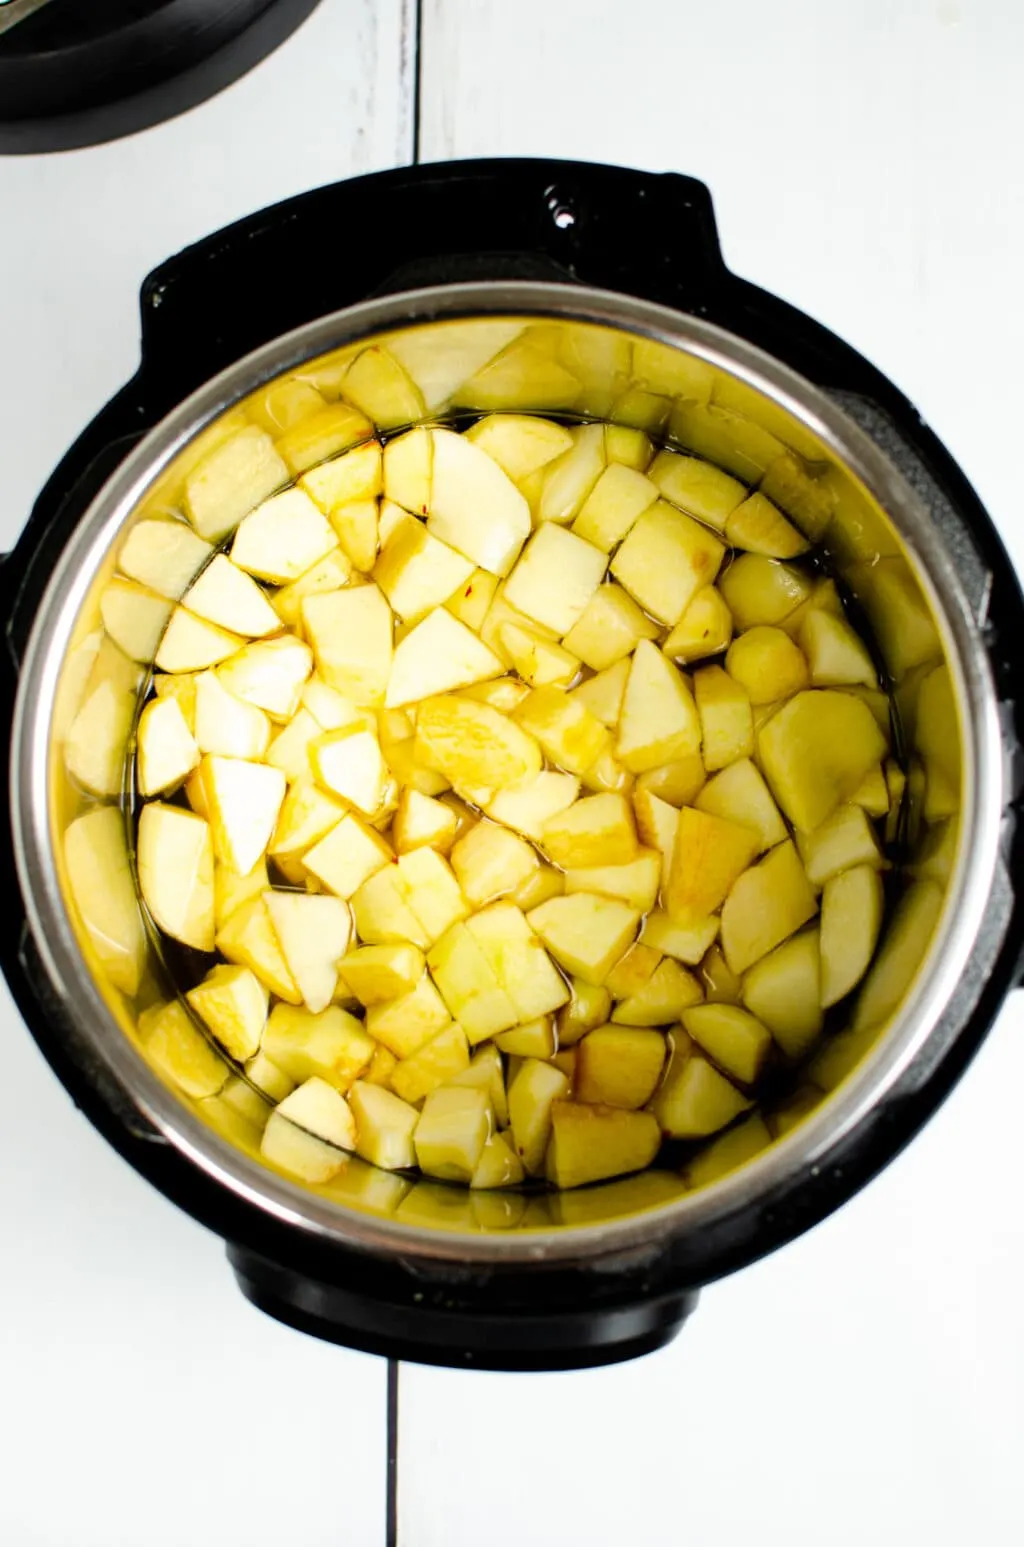 cut apple pieces in water inside an Instant Pot